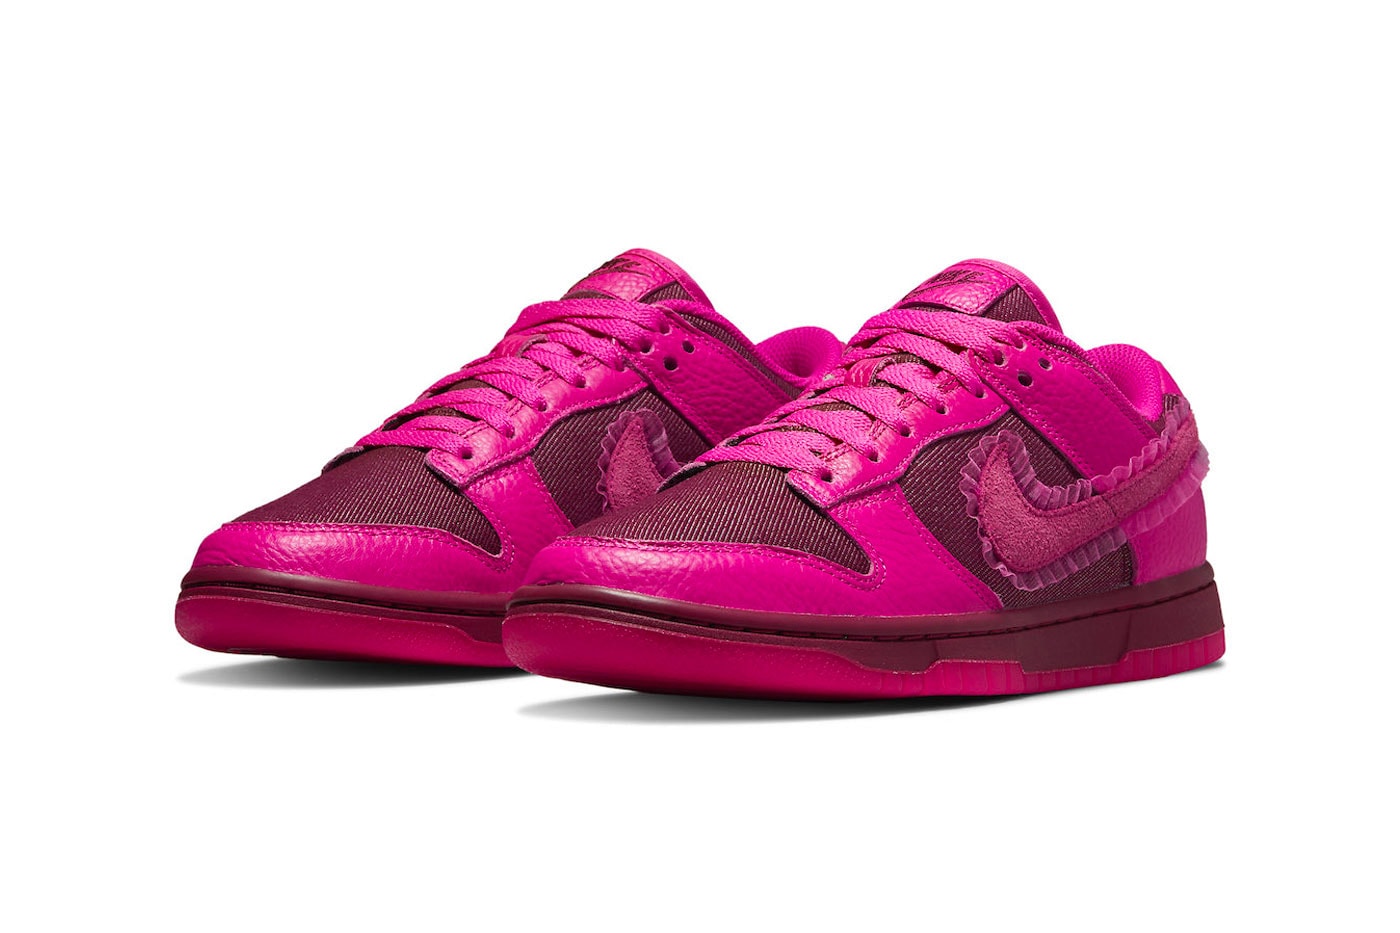 Nike Dunk Low Gets a "Valentine's Day" Treatment DQ9324-600 february team red pink prime love roses special edition